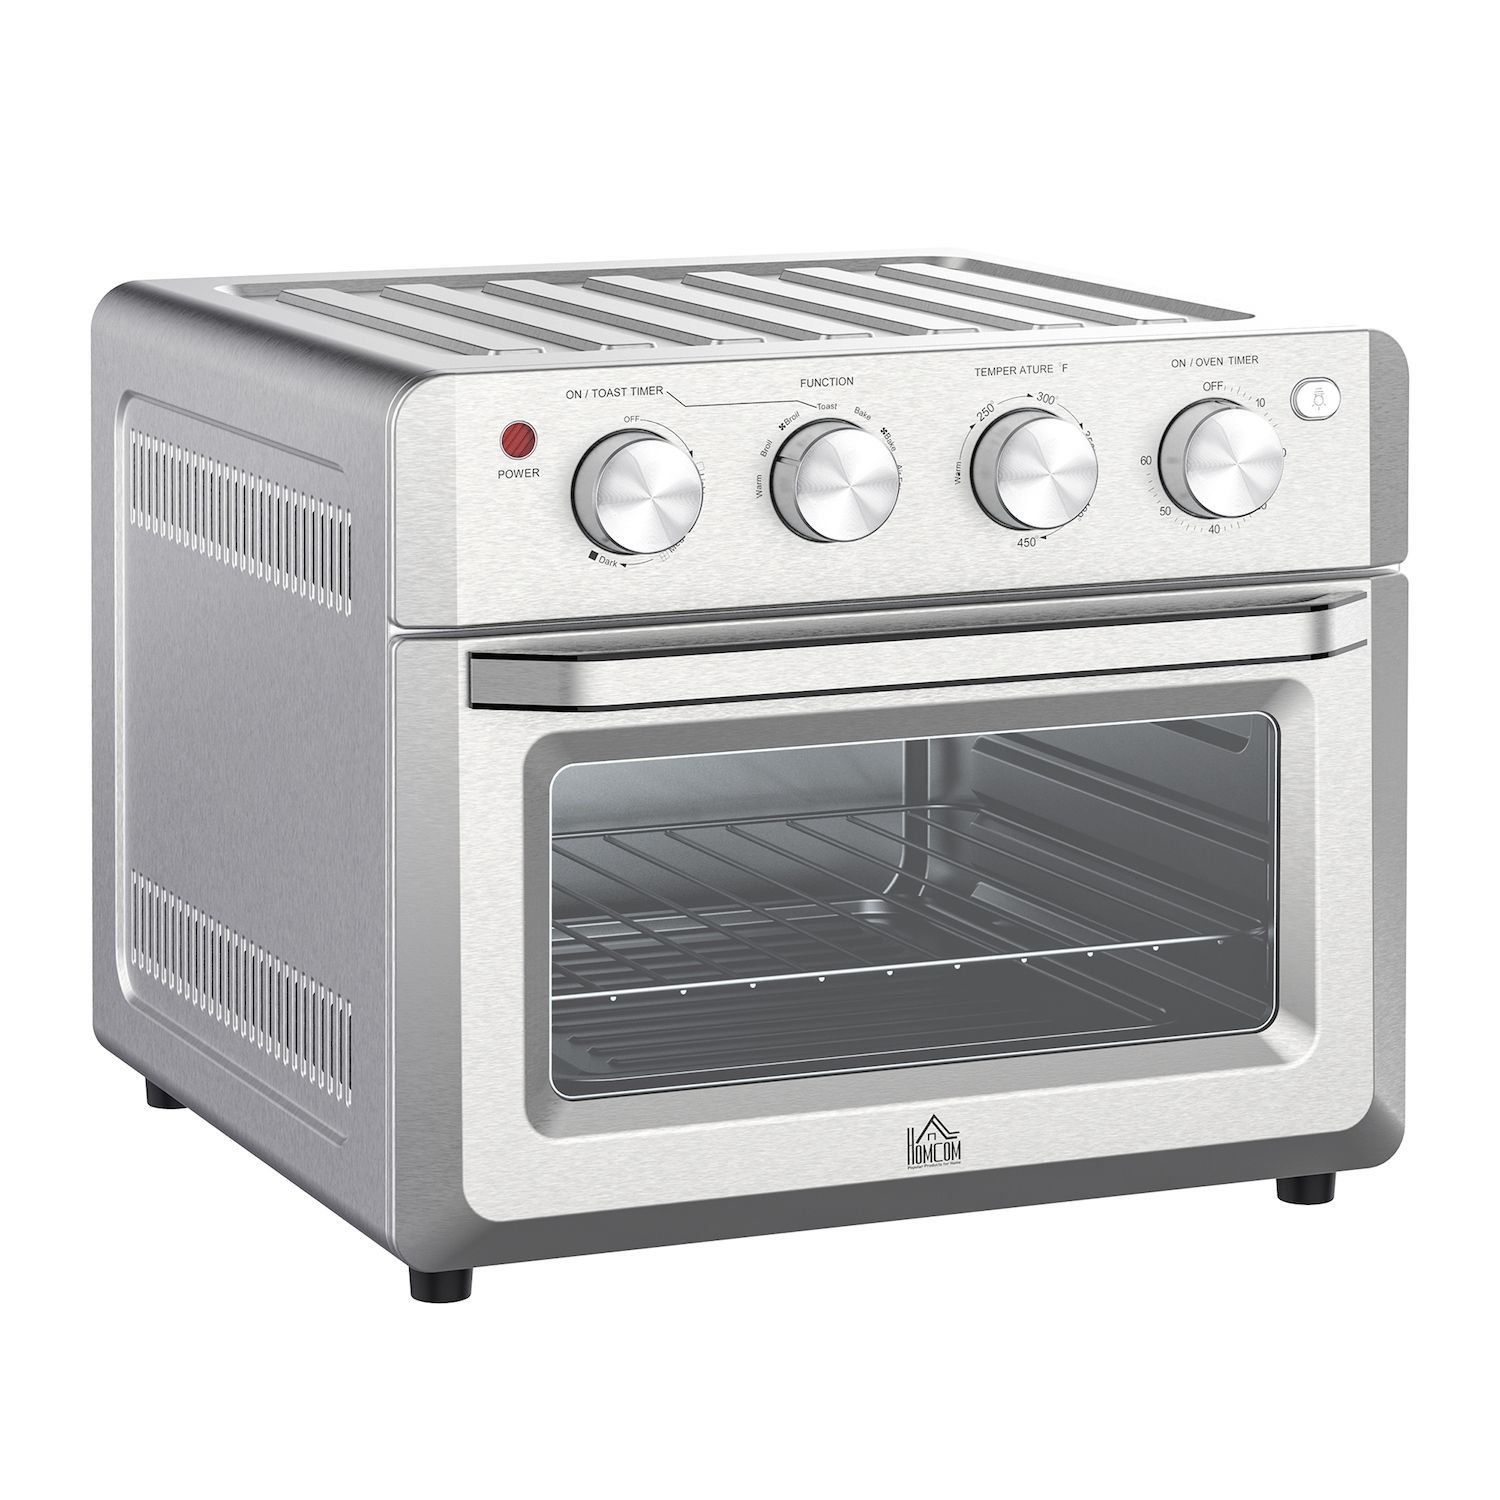 Chefman Toaster Oven, 1800W, 4-Slices of Toast, Black Stainless